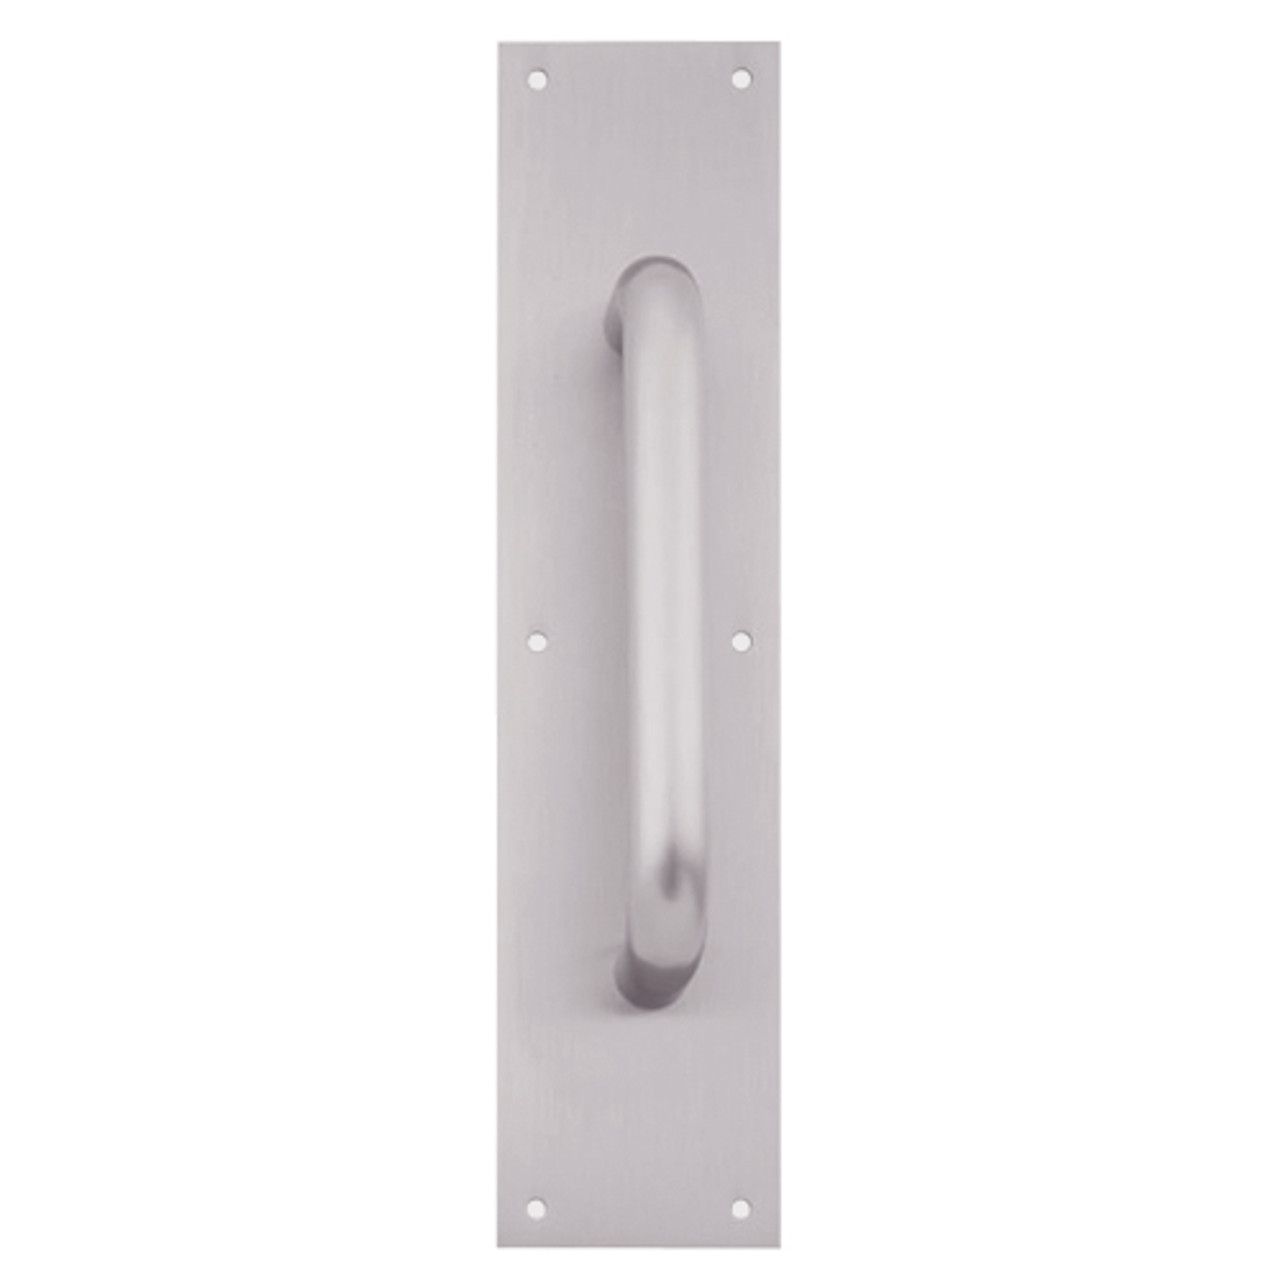 8303-10-US32D-6x16 IVES Architectural Door Trim 6x16 Inch Pull Plate in Satin Stainless Steel